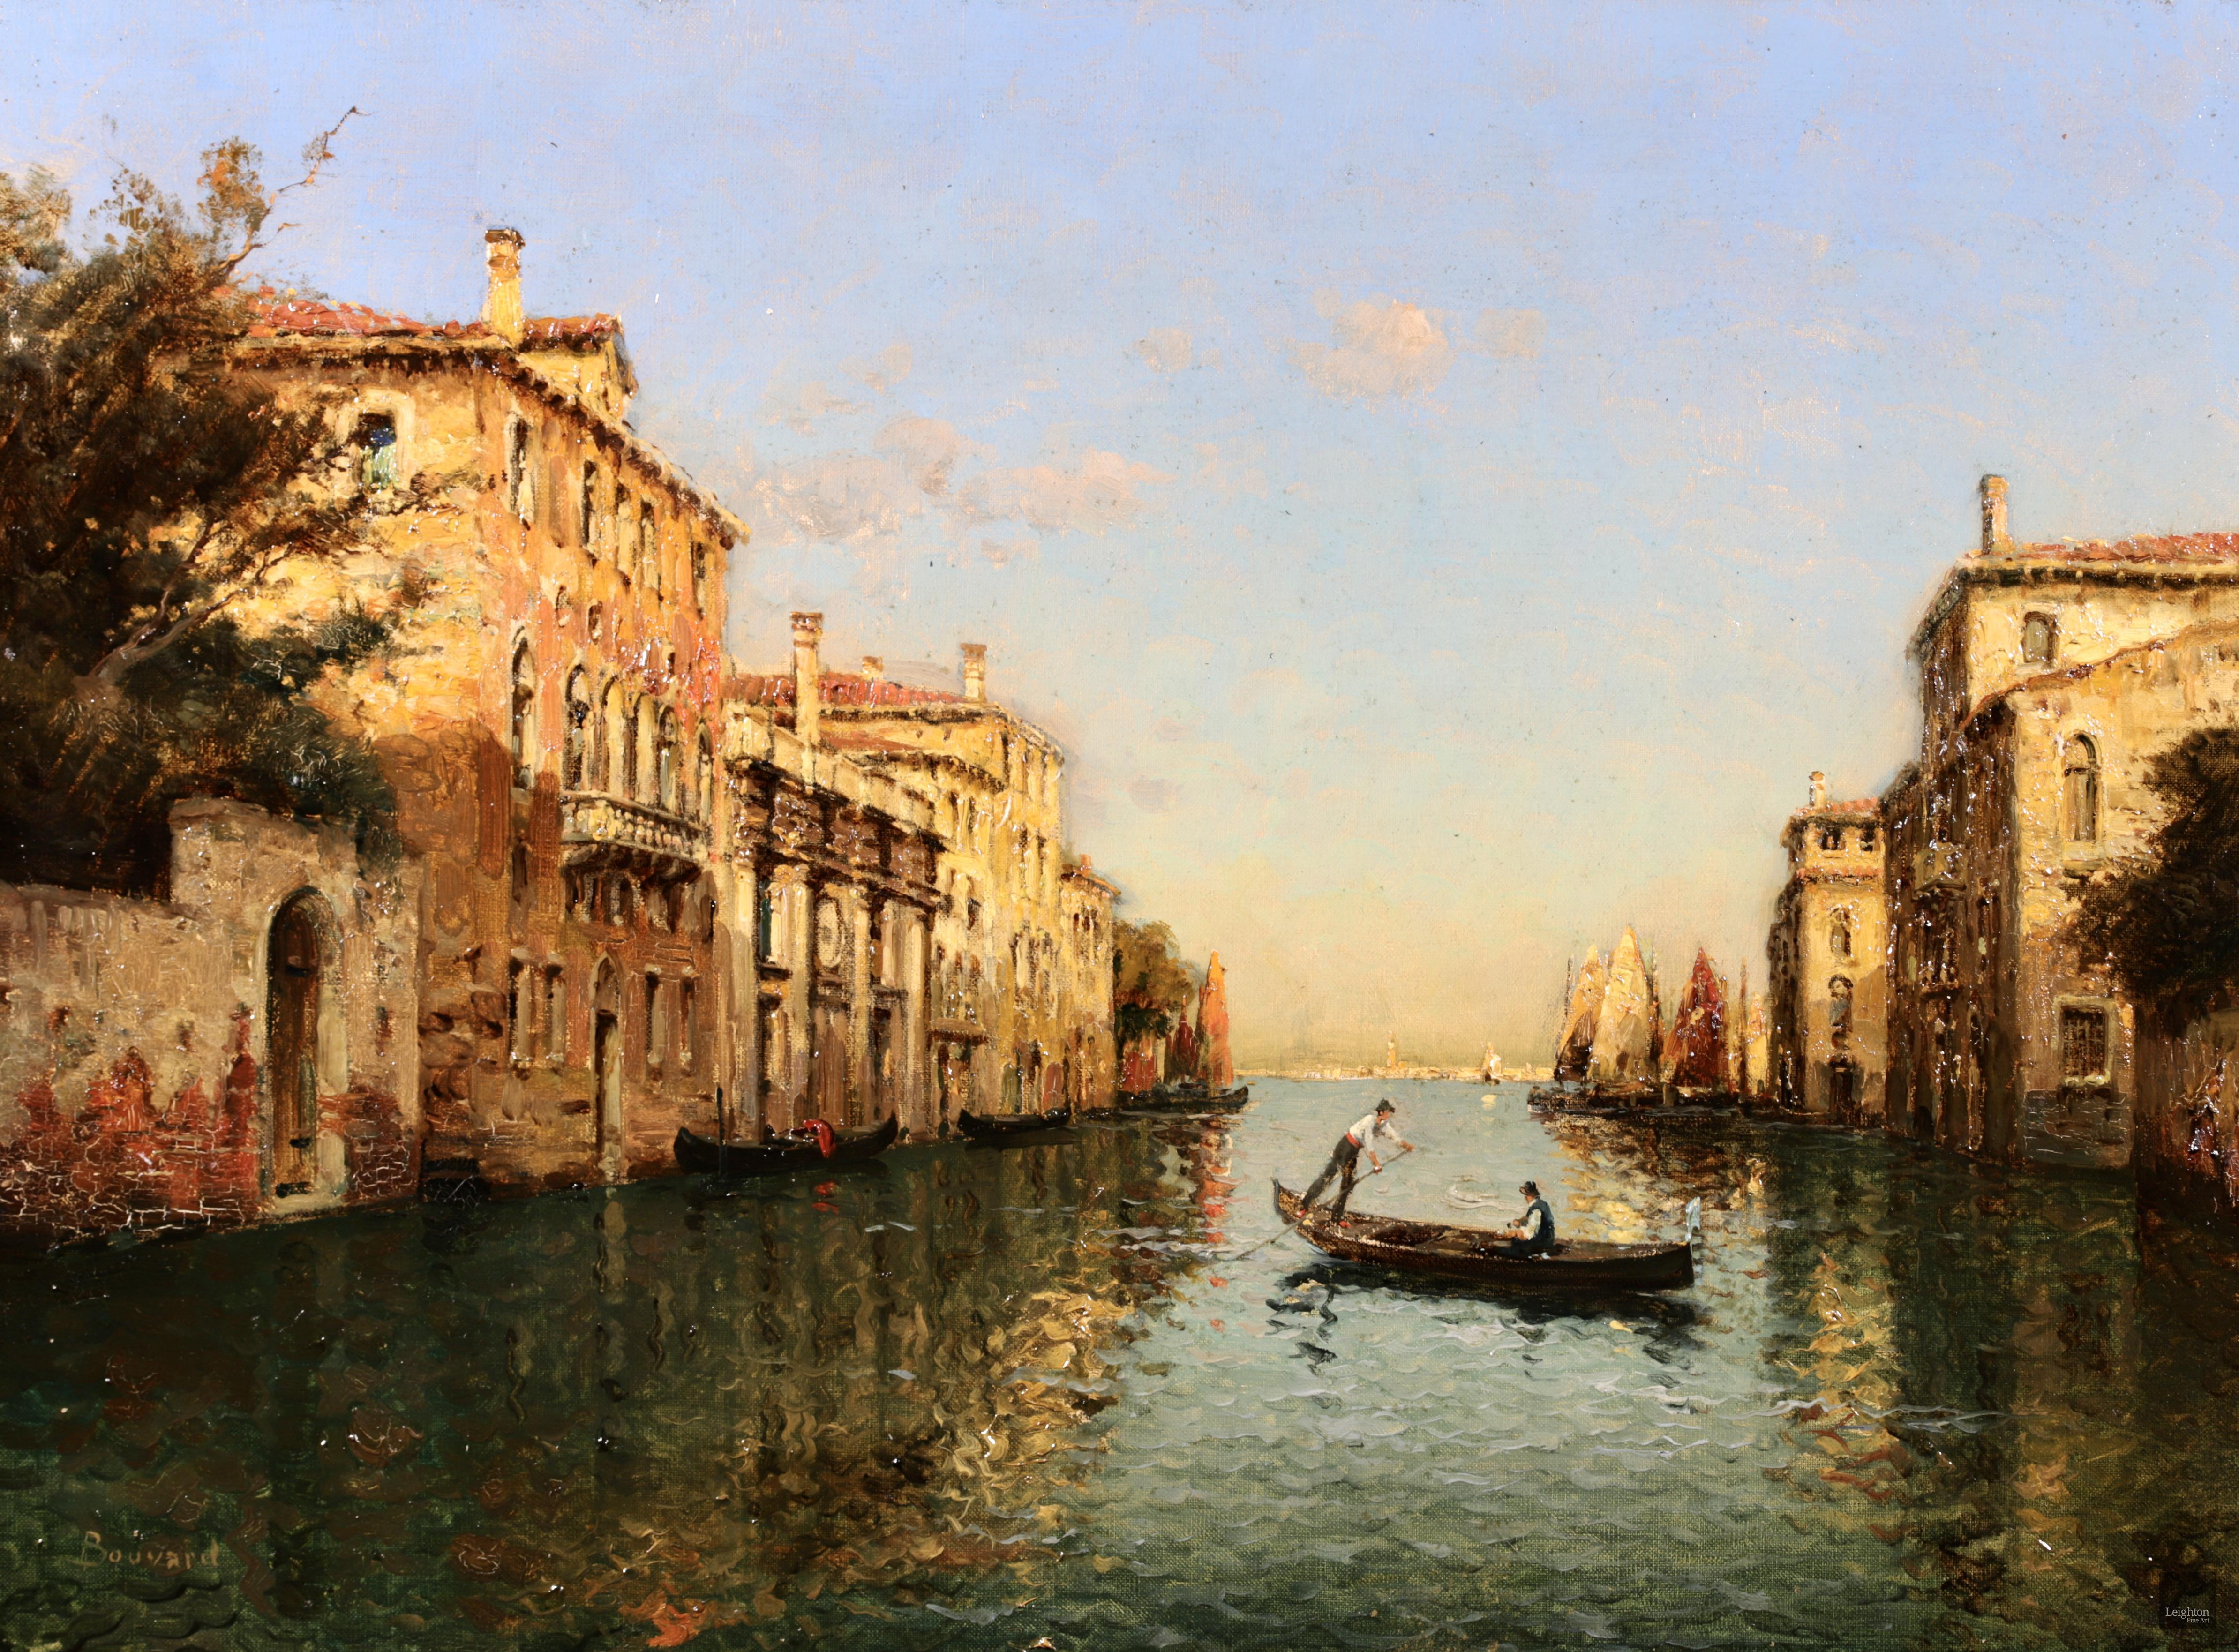 Gondoliers on a canal - Venice - Impressionist Oil, Landscape by Antoine Bouvard - Painting by Antoine Bouvard Snr. 